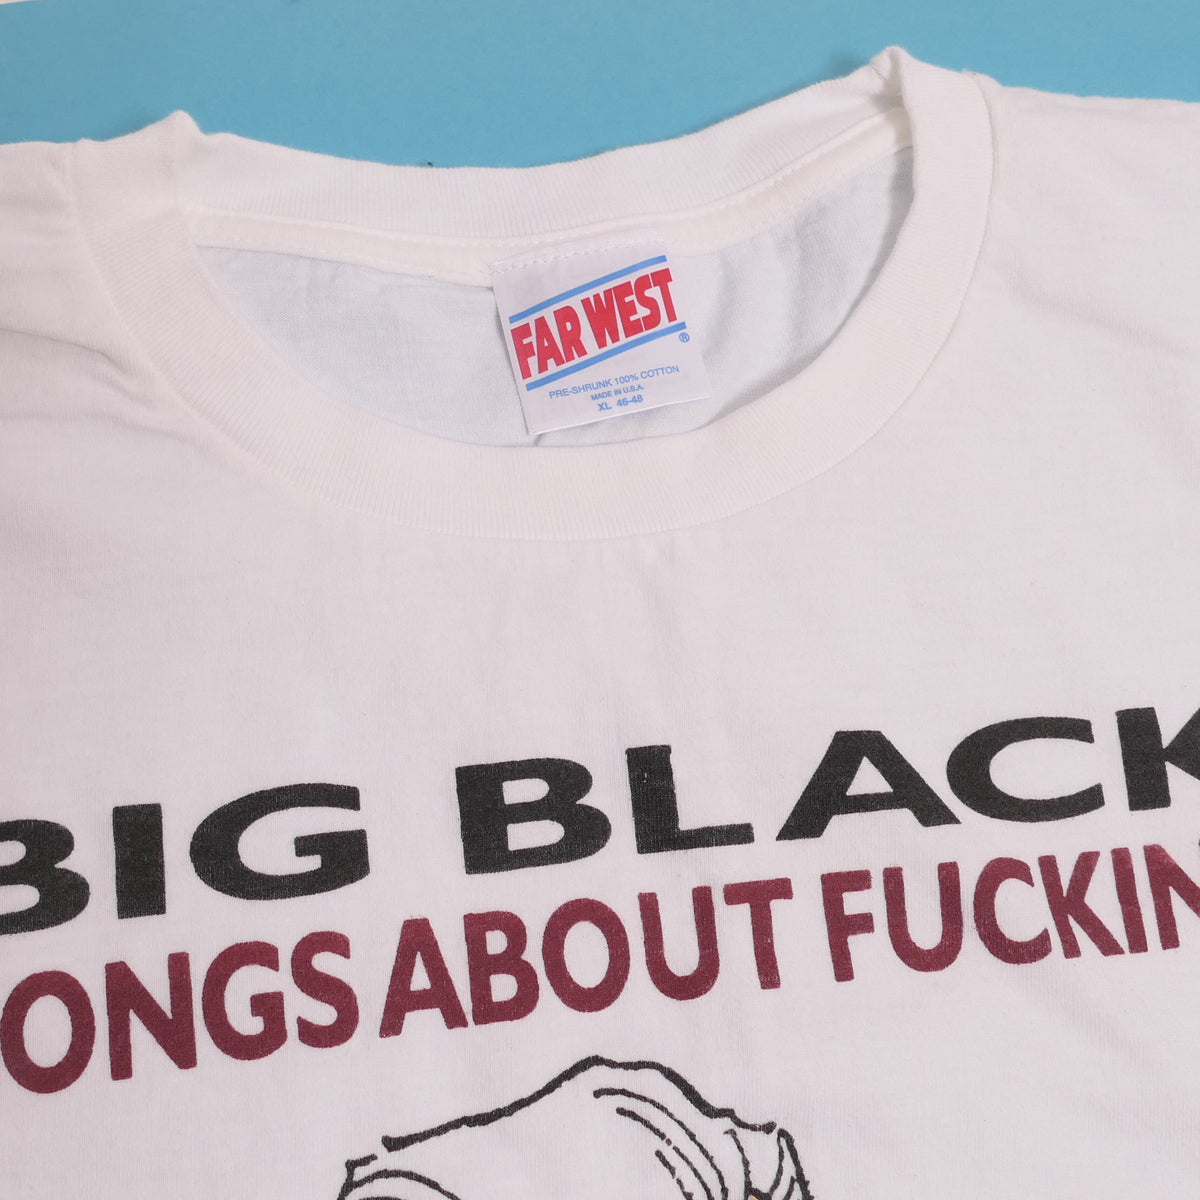 Big Black Songs About F***ing Tee